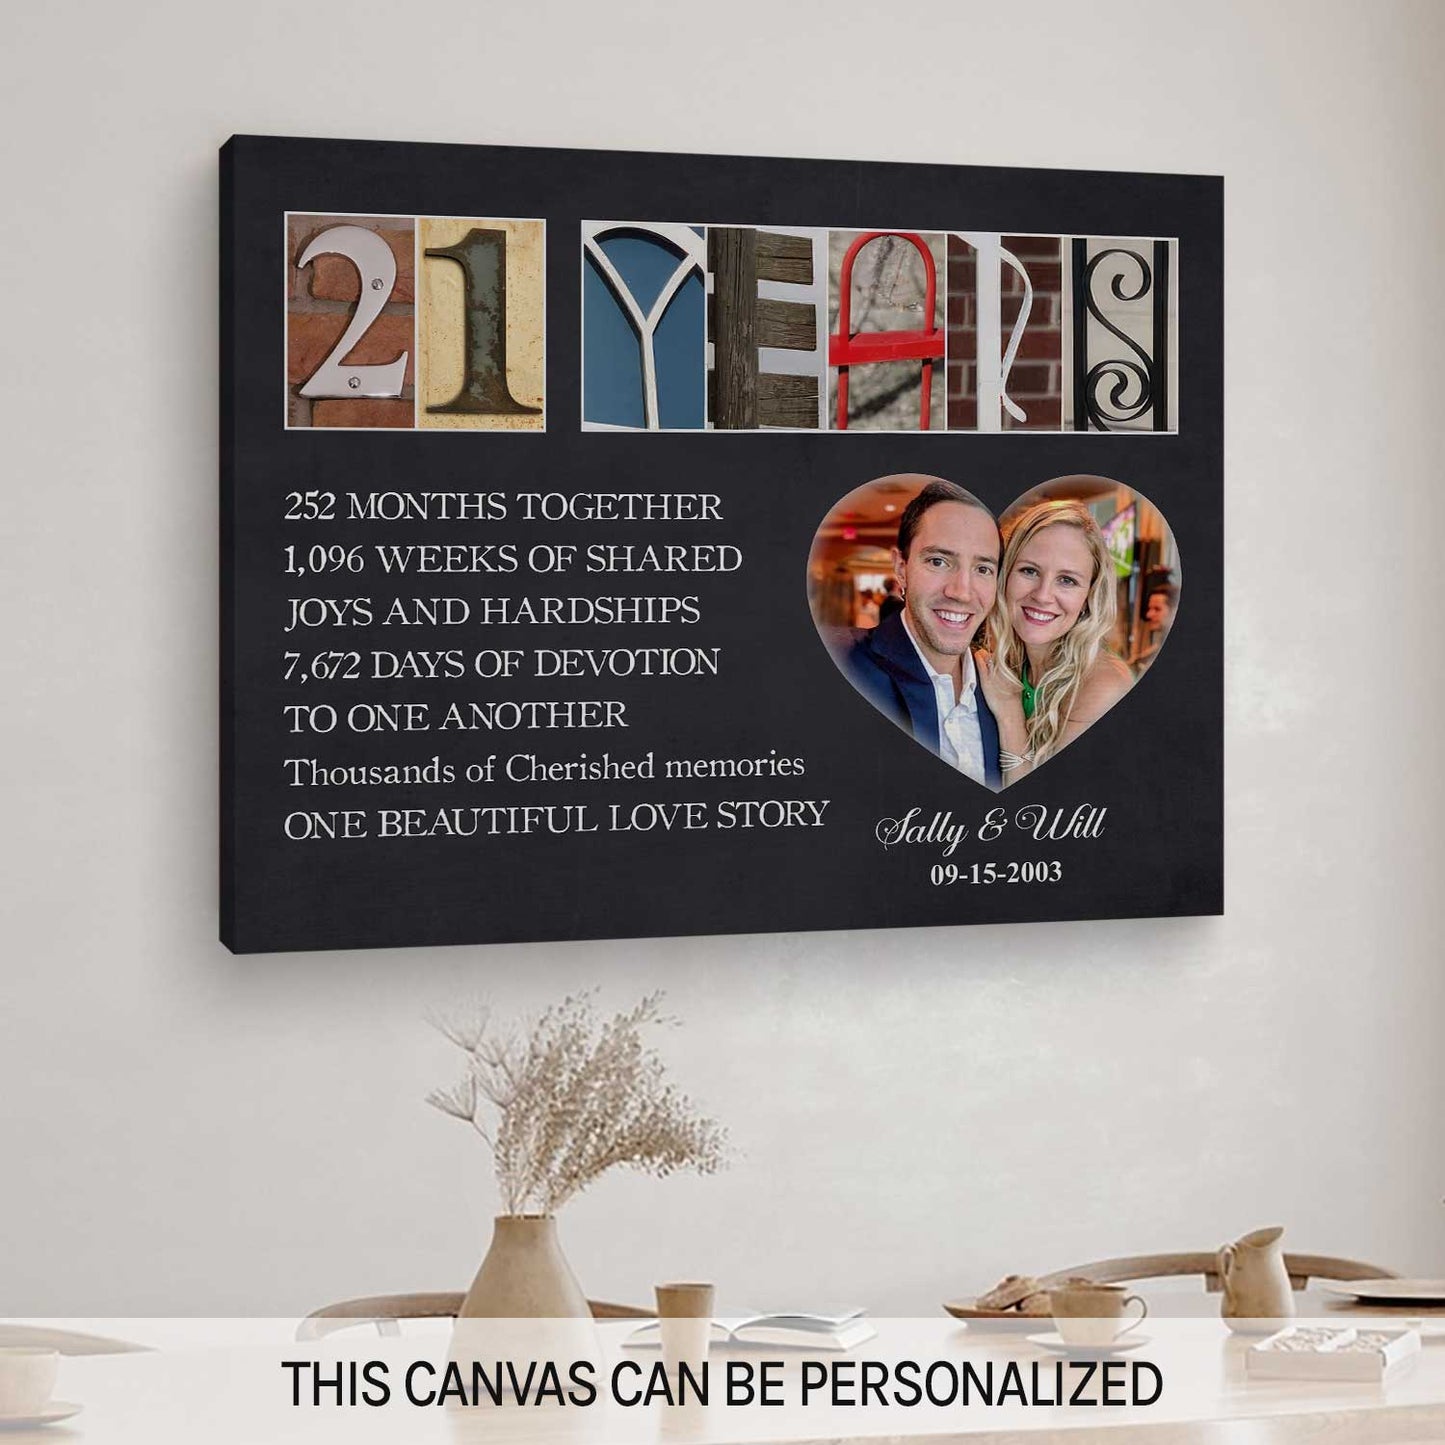 21 Years - Personalized 21 Year Anniversary gift For Parents - Custom Canvas Print - MyMindfulGifts